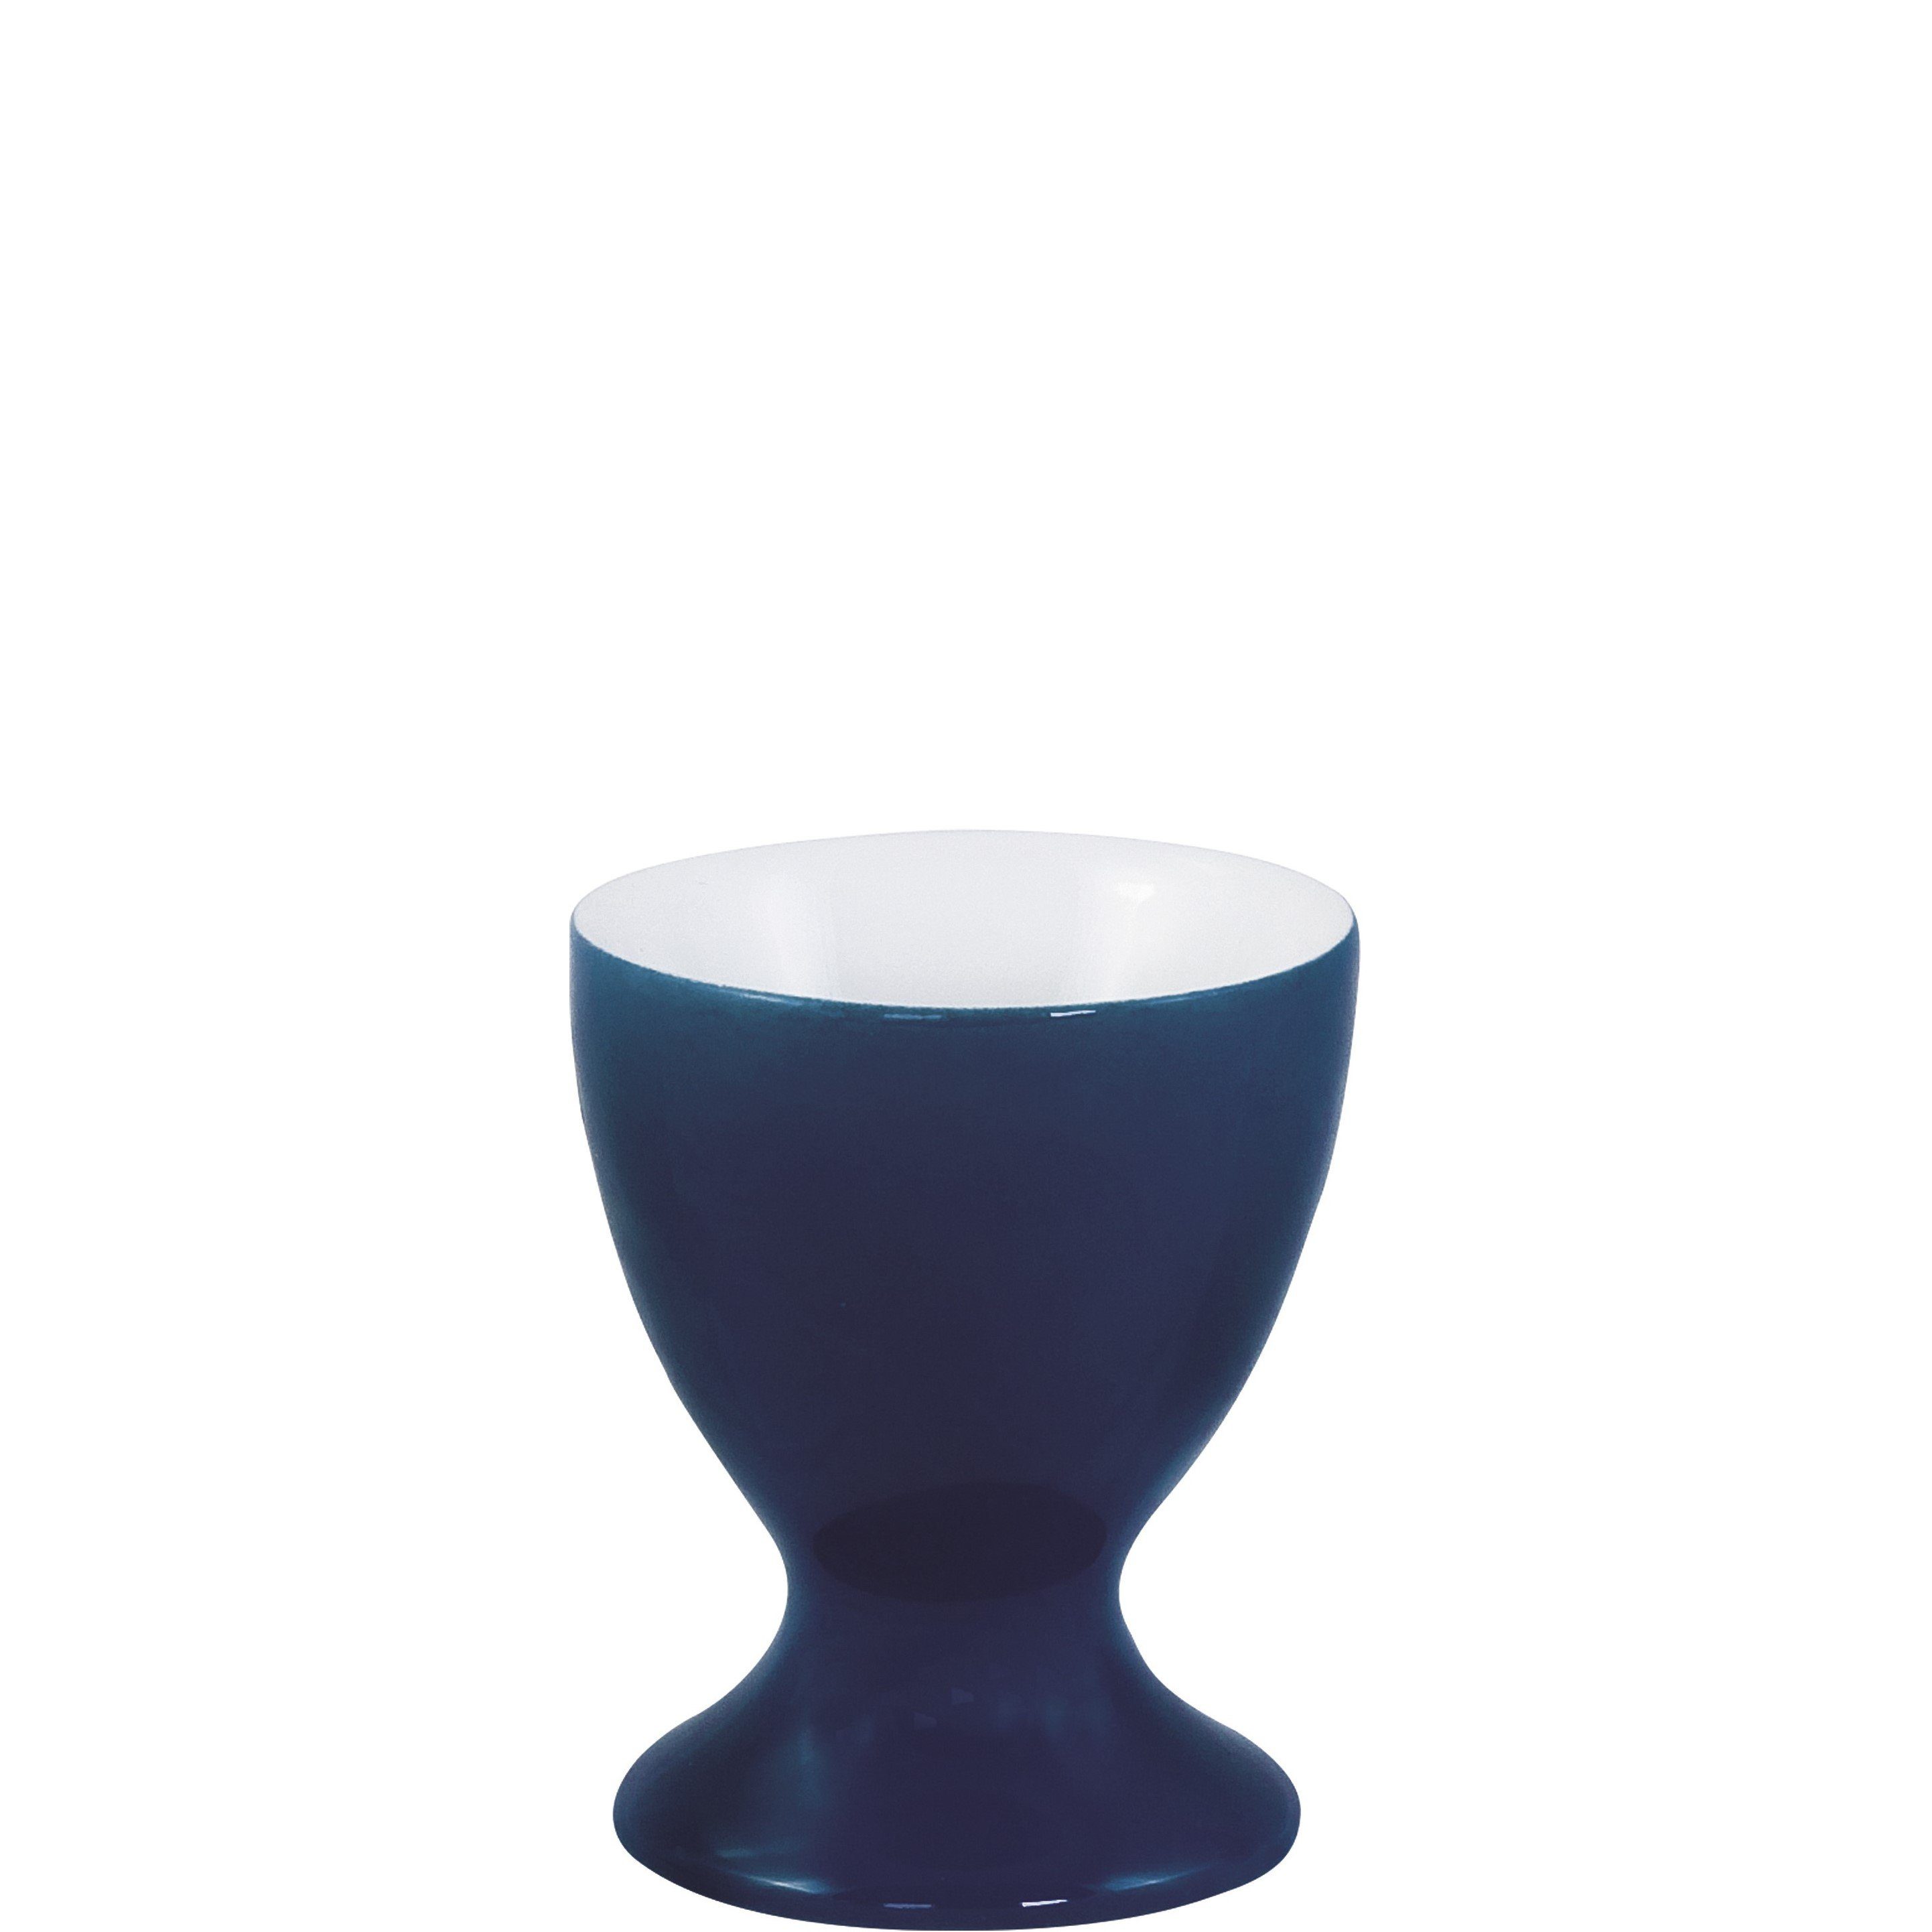 Kahla Eierbecher mit Fuß, Pronto Colore, Made in Germany royal blue